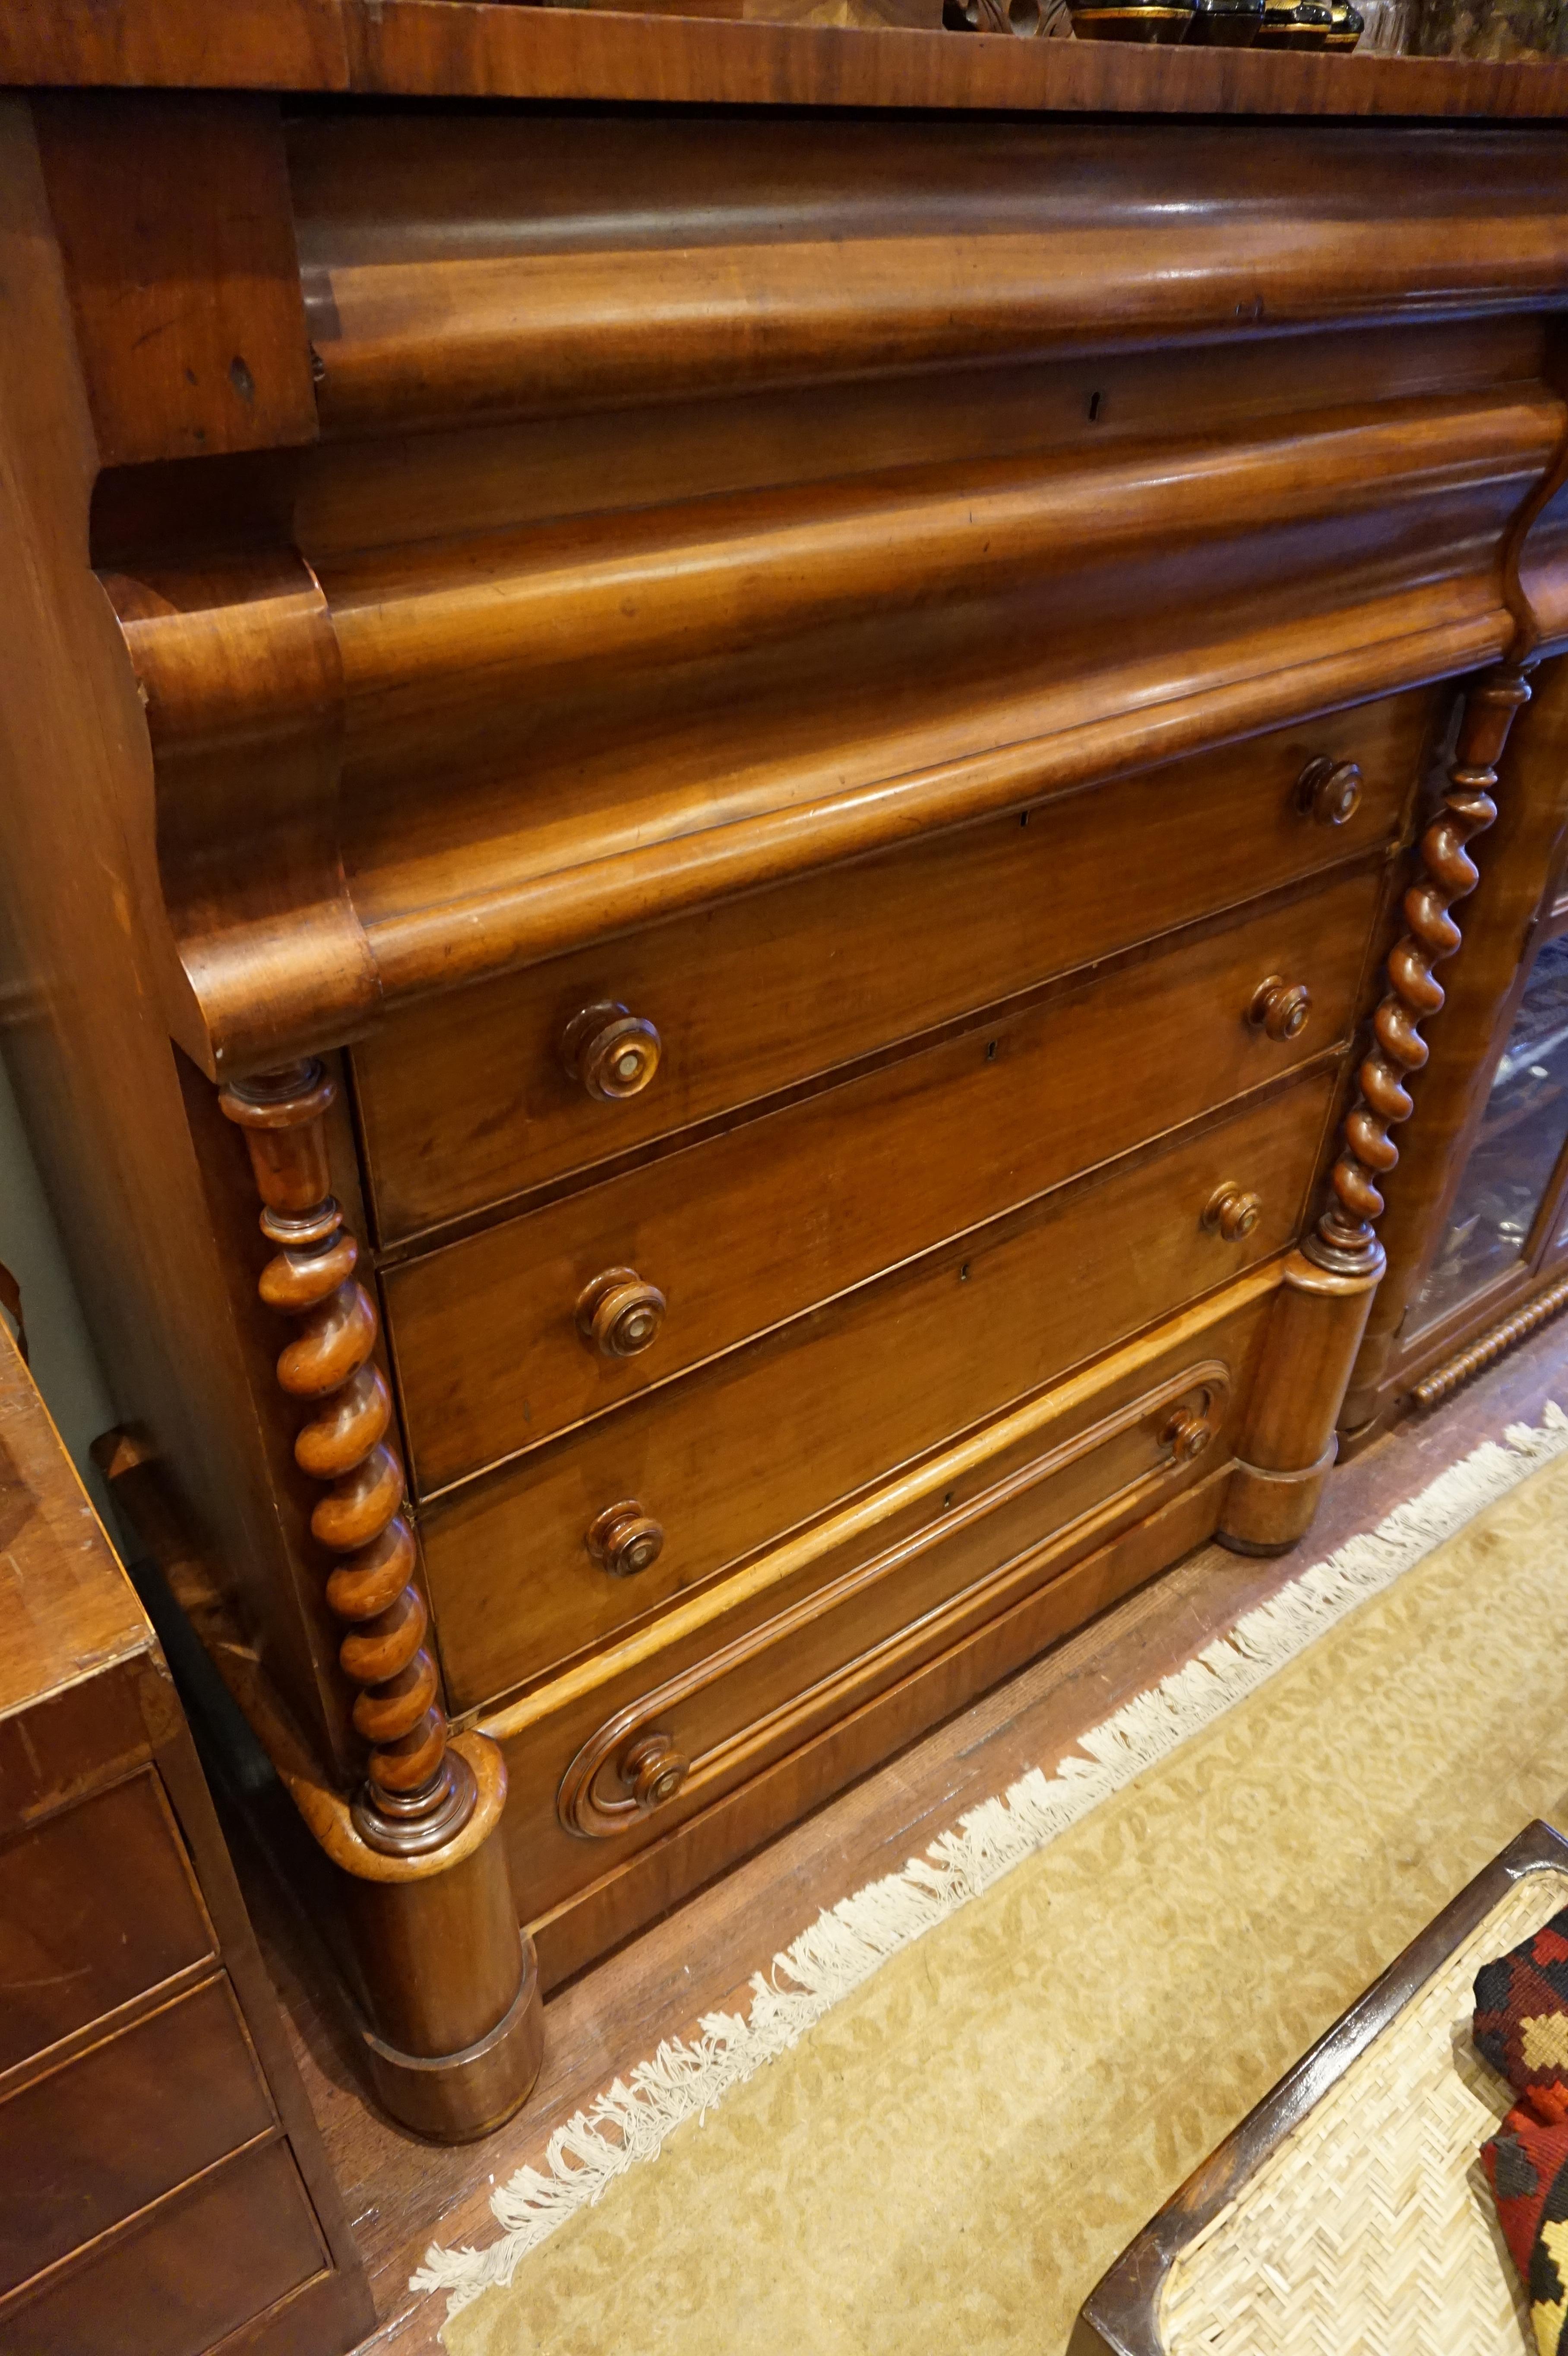 Empire mahogany highboy dresser circa 1830-1840 with sectionals and graduated drawers. Barley twist columns flank the sides of this stately piece. Fine dovetailing and mother of pearl inlay on handles subtly distinguish this piece. Some nicks and